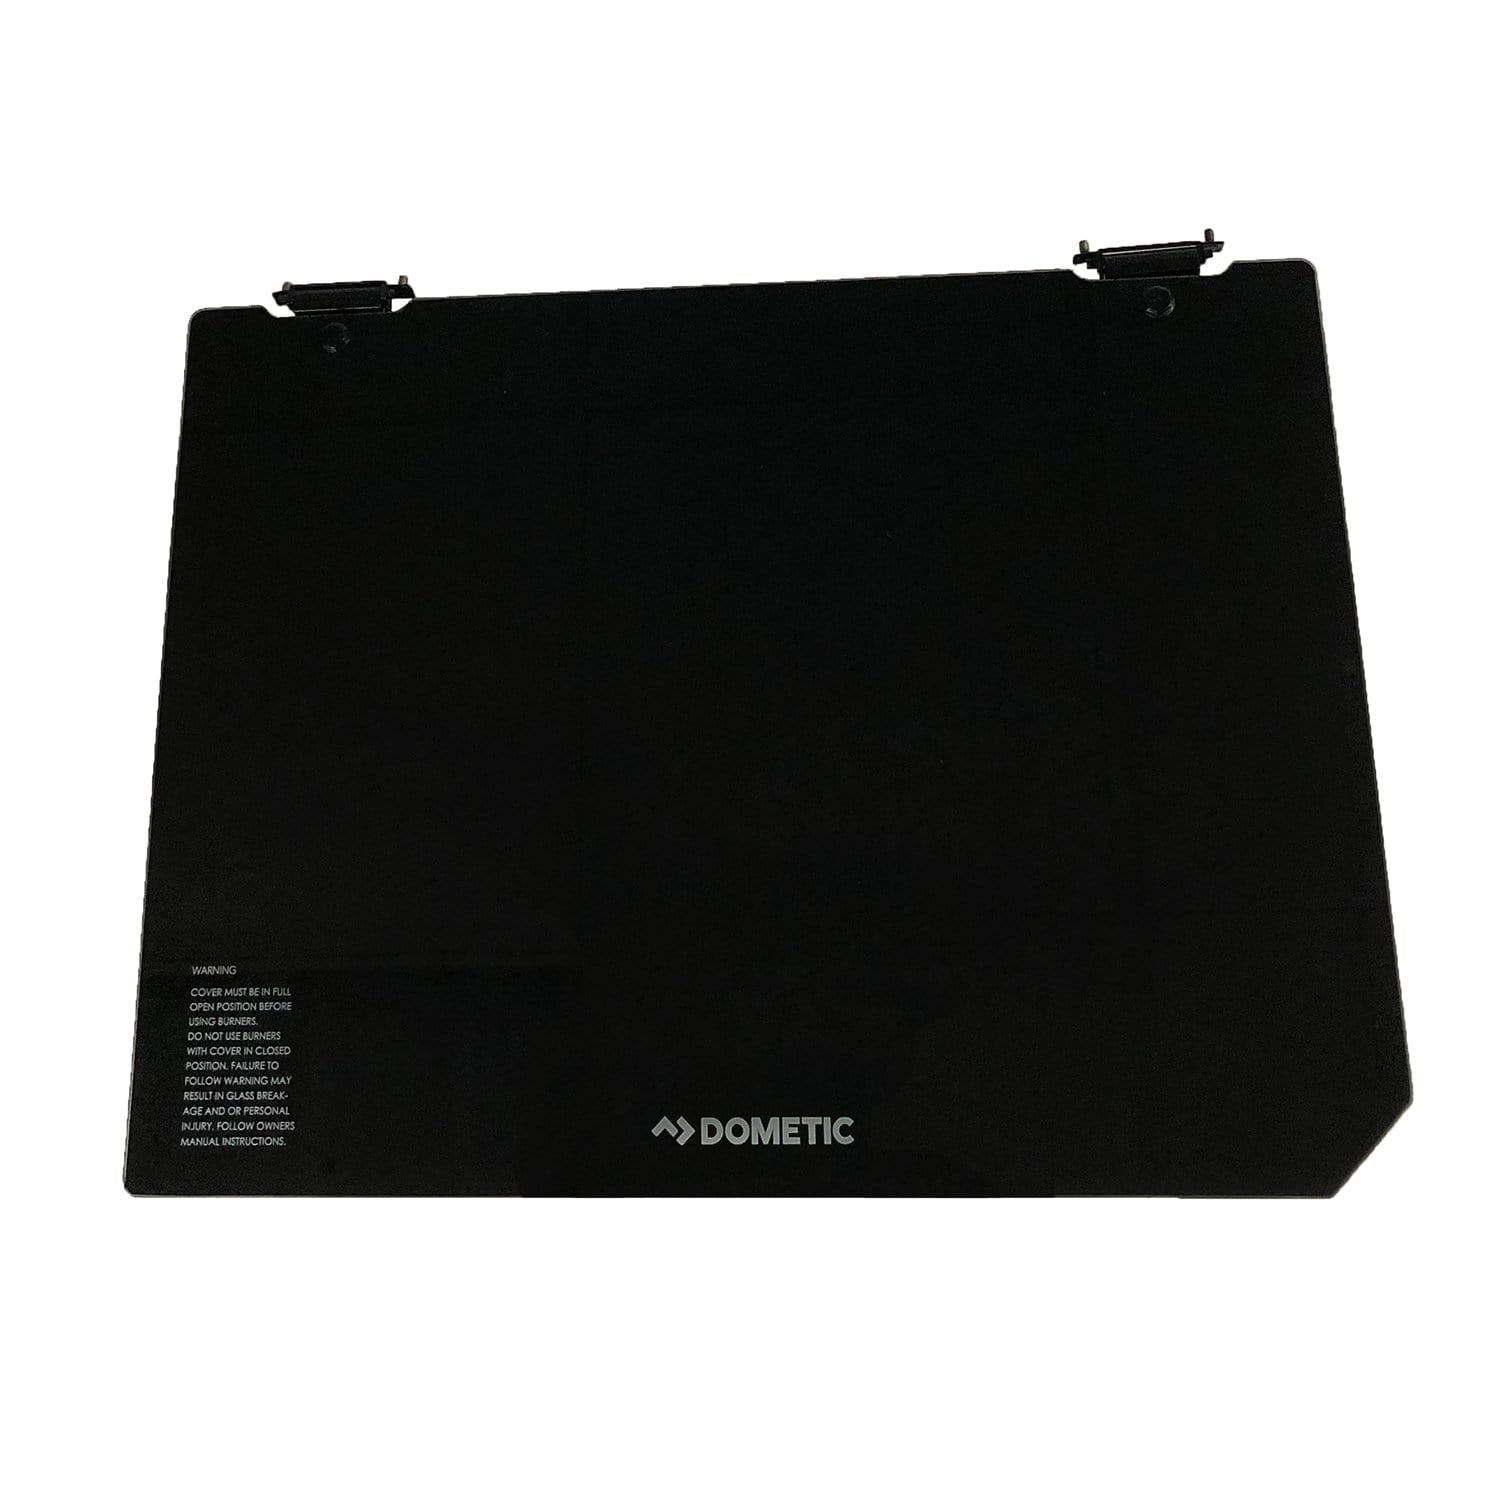 Dometic 50225 Drop-In Cooktop Glass Cover, Black